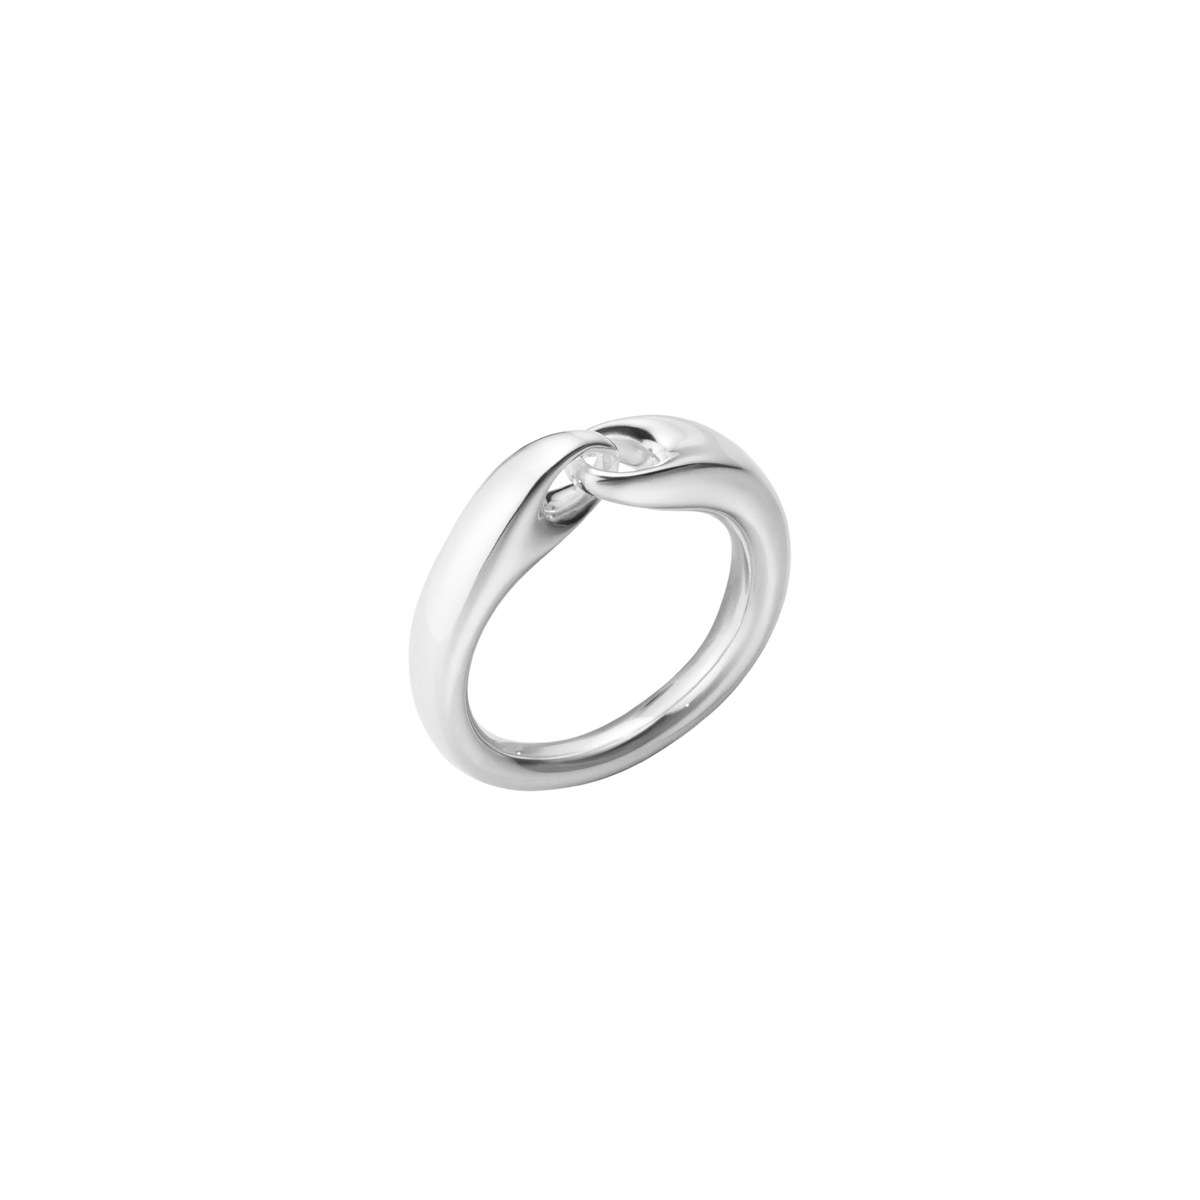 REFLECT Ring in sterling silver